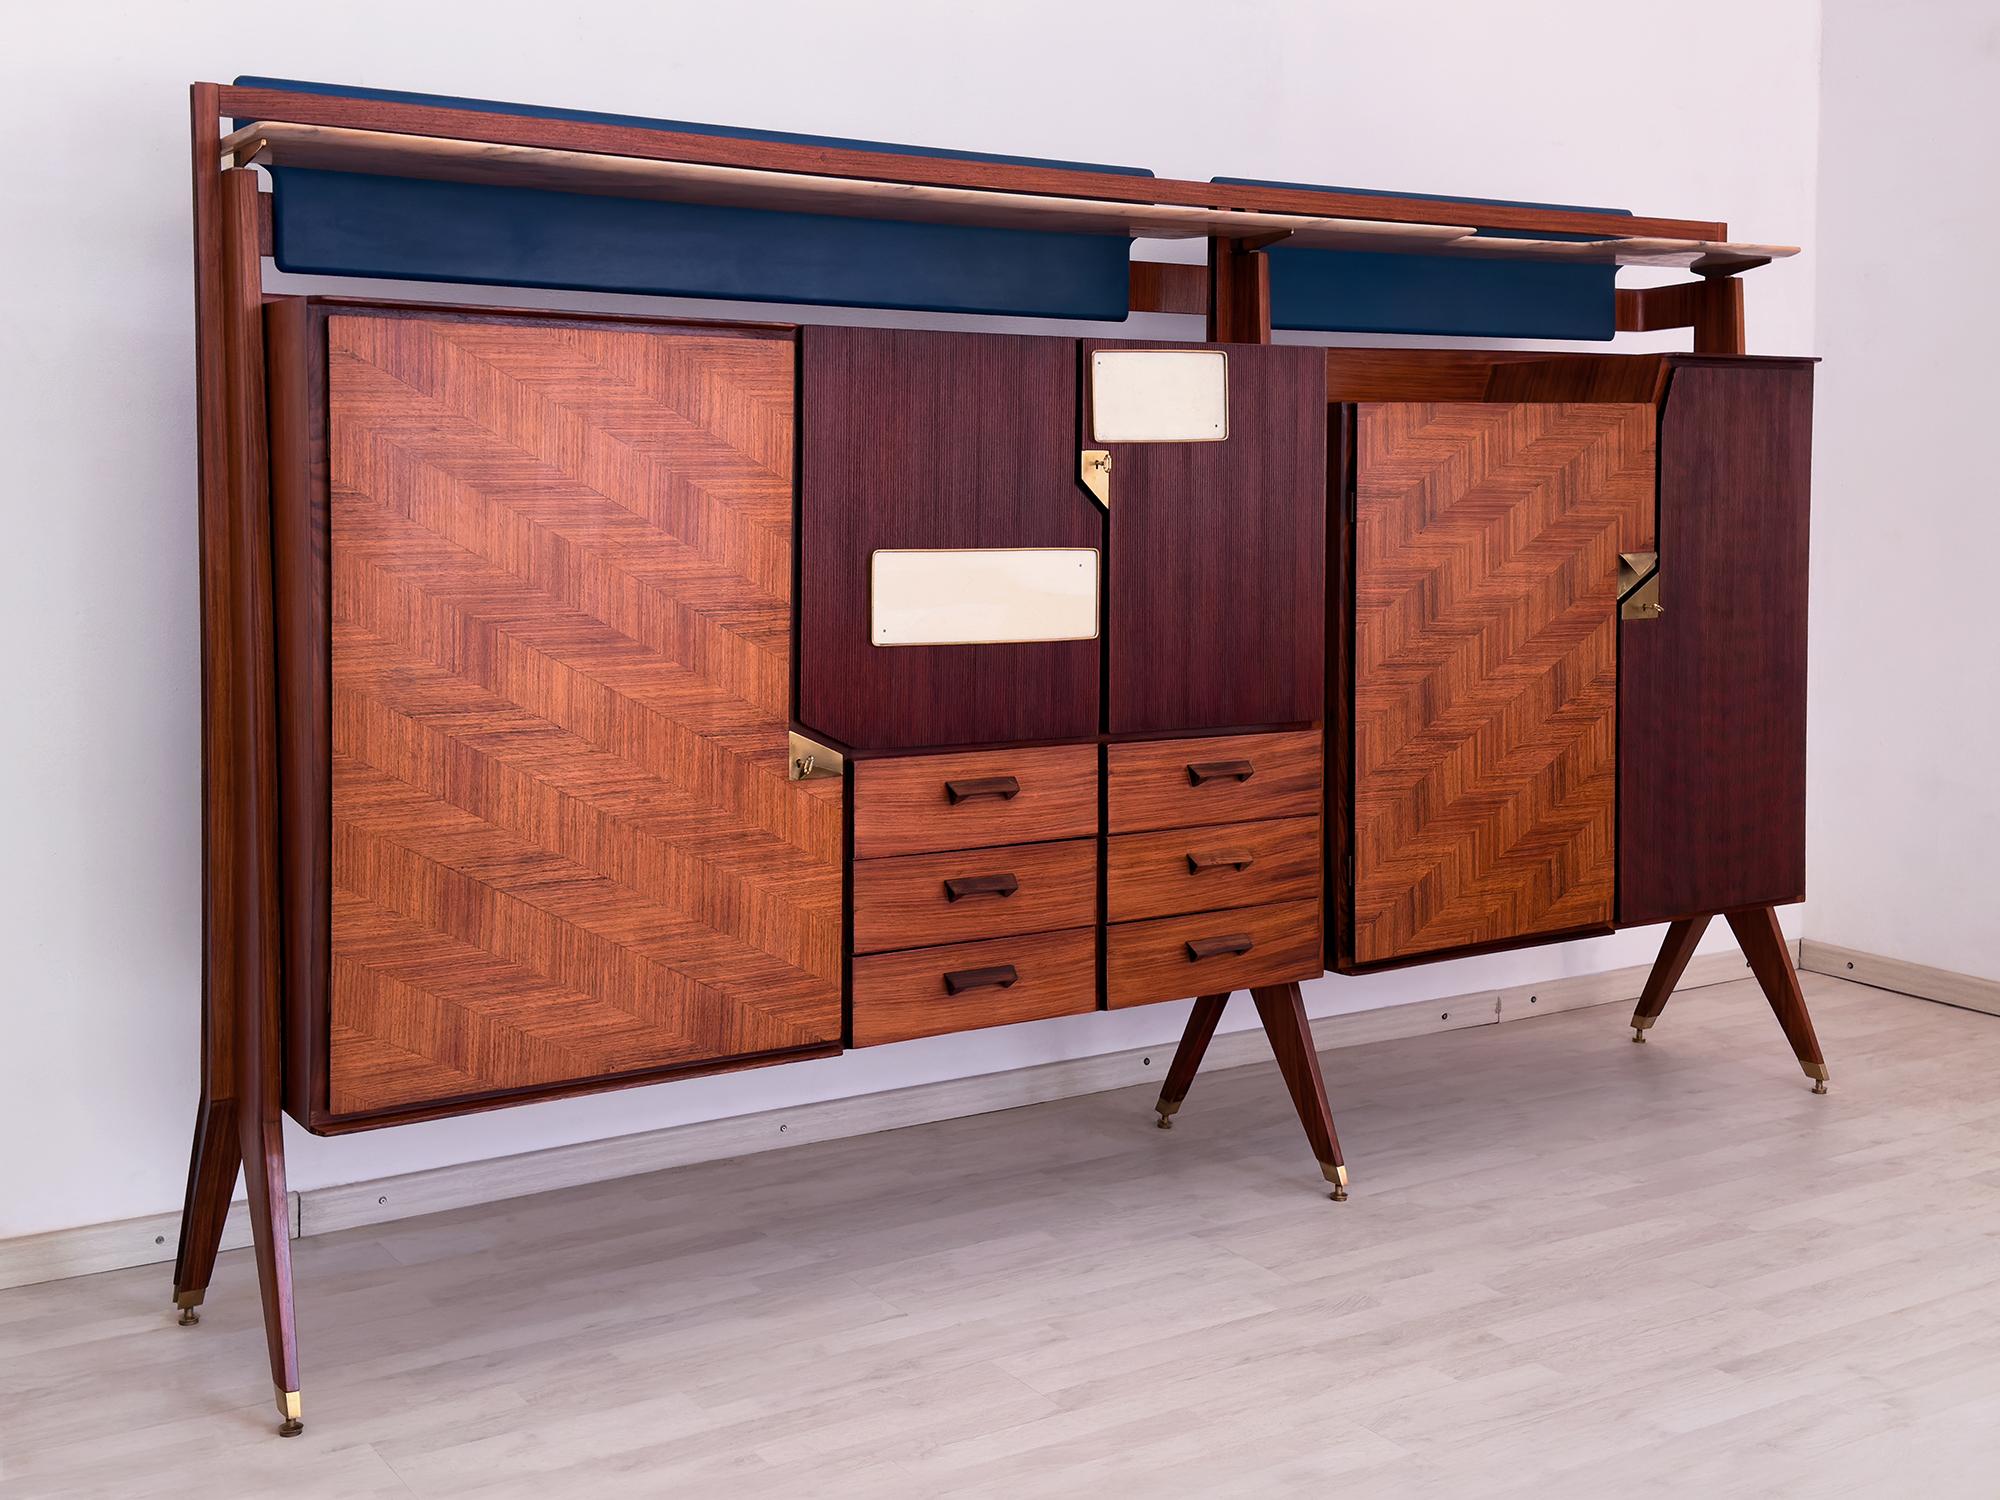 Italian Midcentury Sideboard or Bar Cabinet by La Permanente Mobili Cantù, 1950s For Sale 9